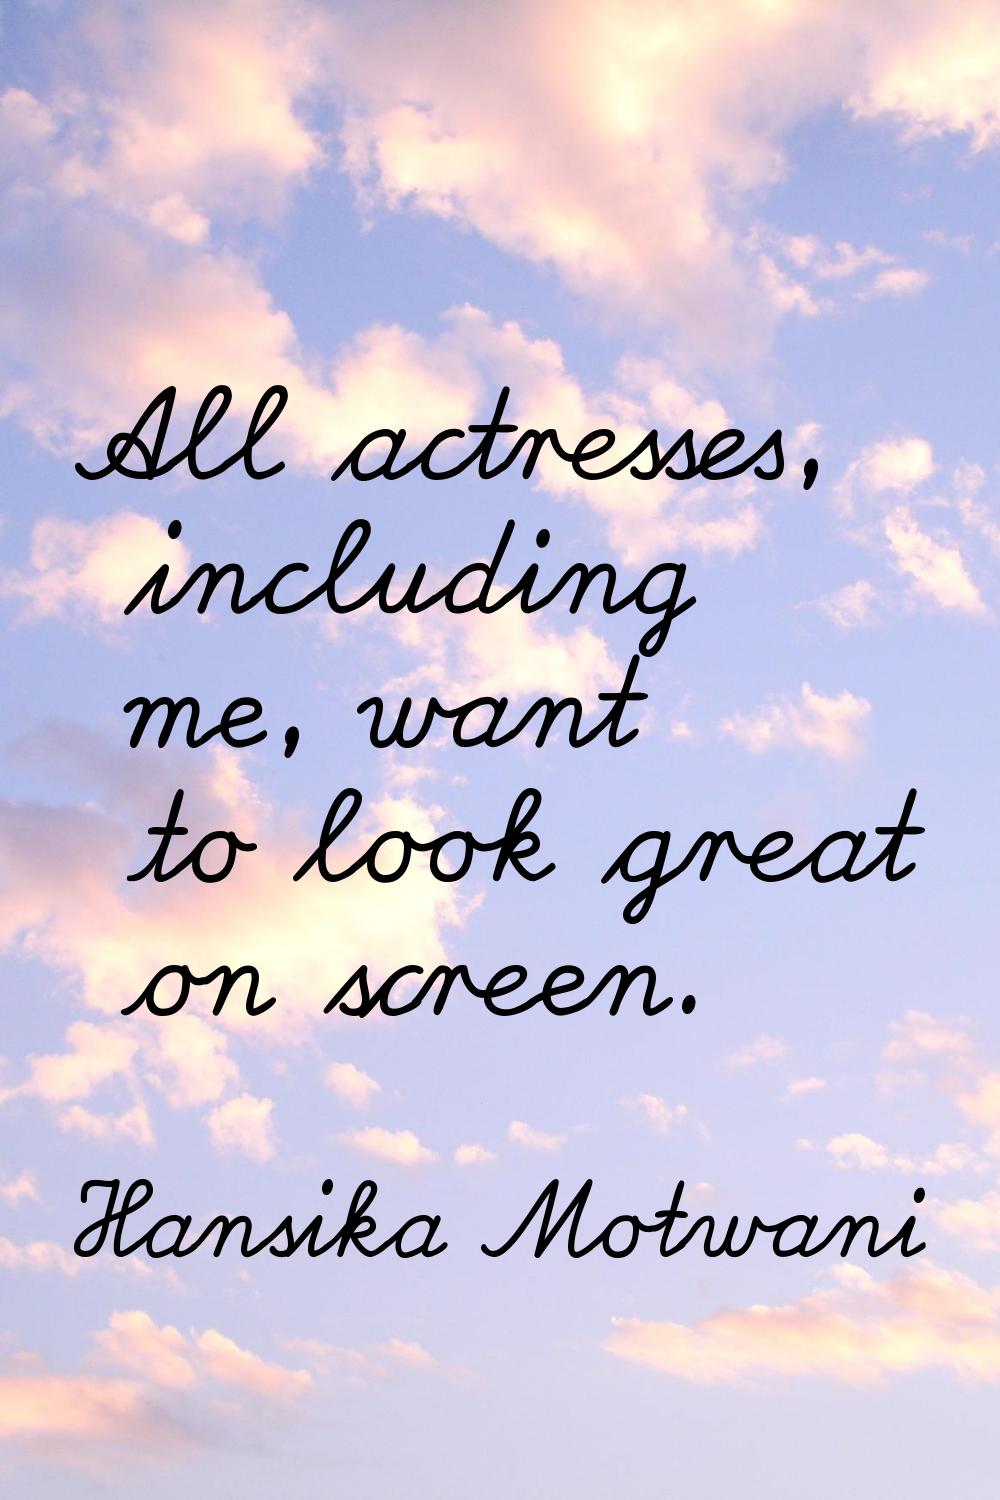 All actresses, including me, want to look great on screen.